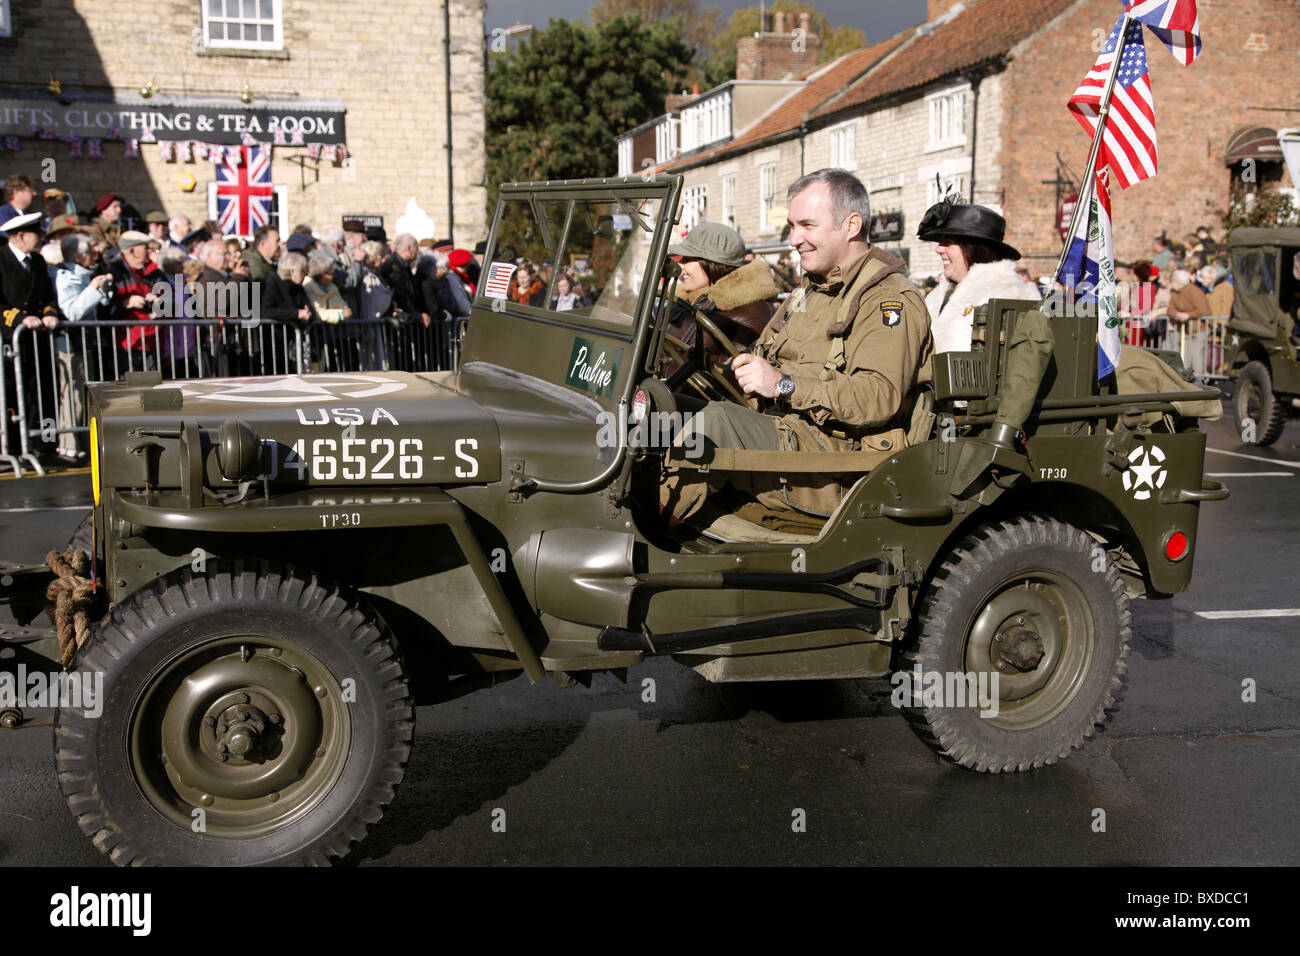 US ARMY JEEP PICKERING NORTH YORKSHIRE PICKERING NORTH YORKSHIRE PICKERING NORTH YORKSHIRE 16 October 2010 Stock Photo